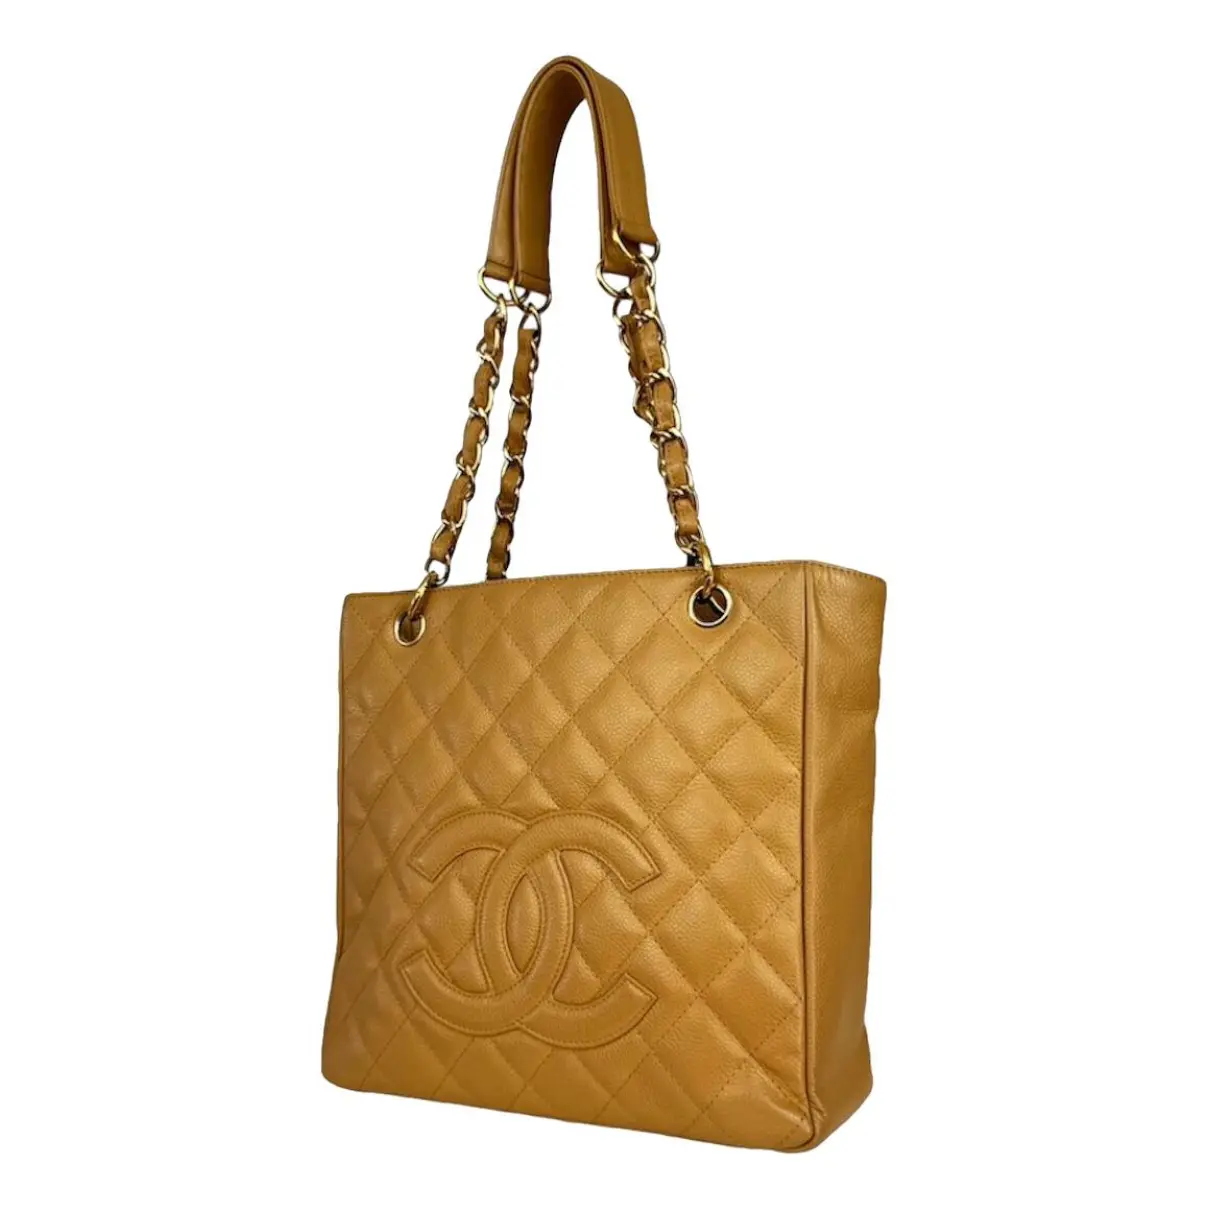 Petite Shopping Tote leather tote Chanel - Vintage